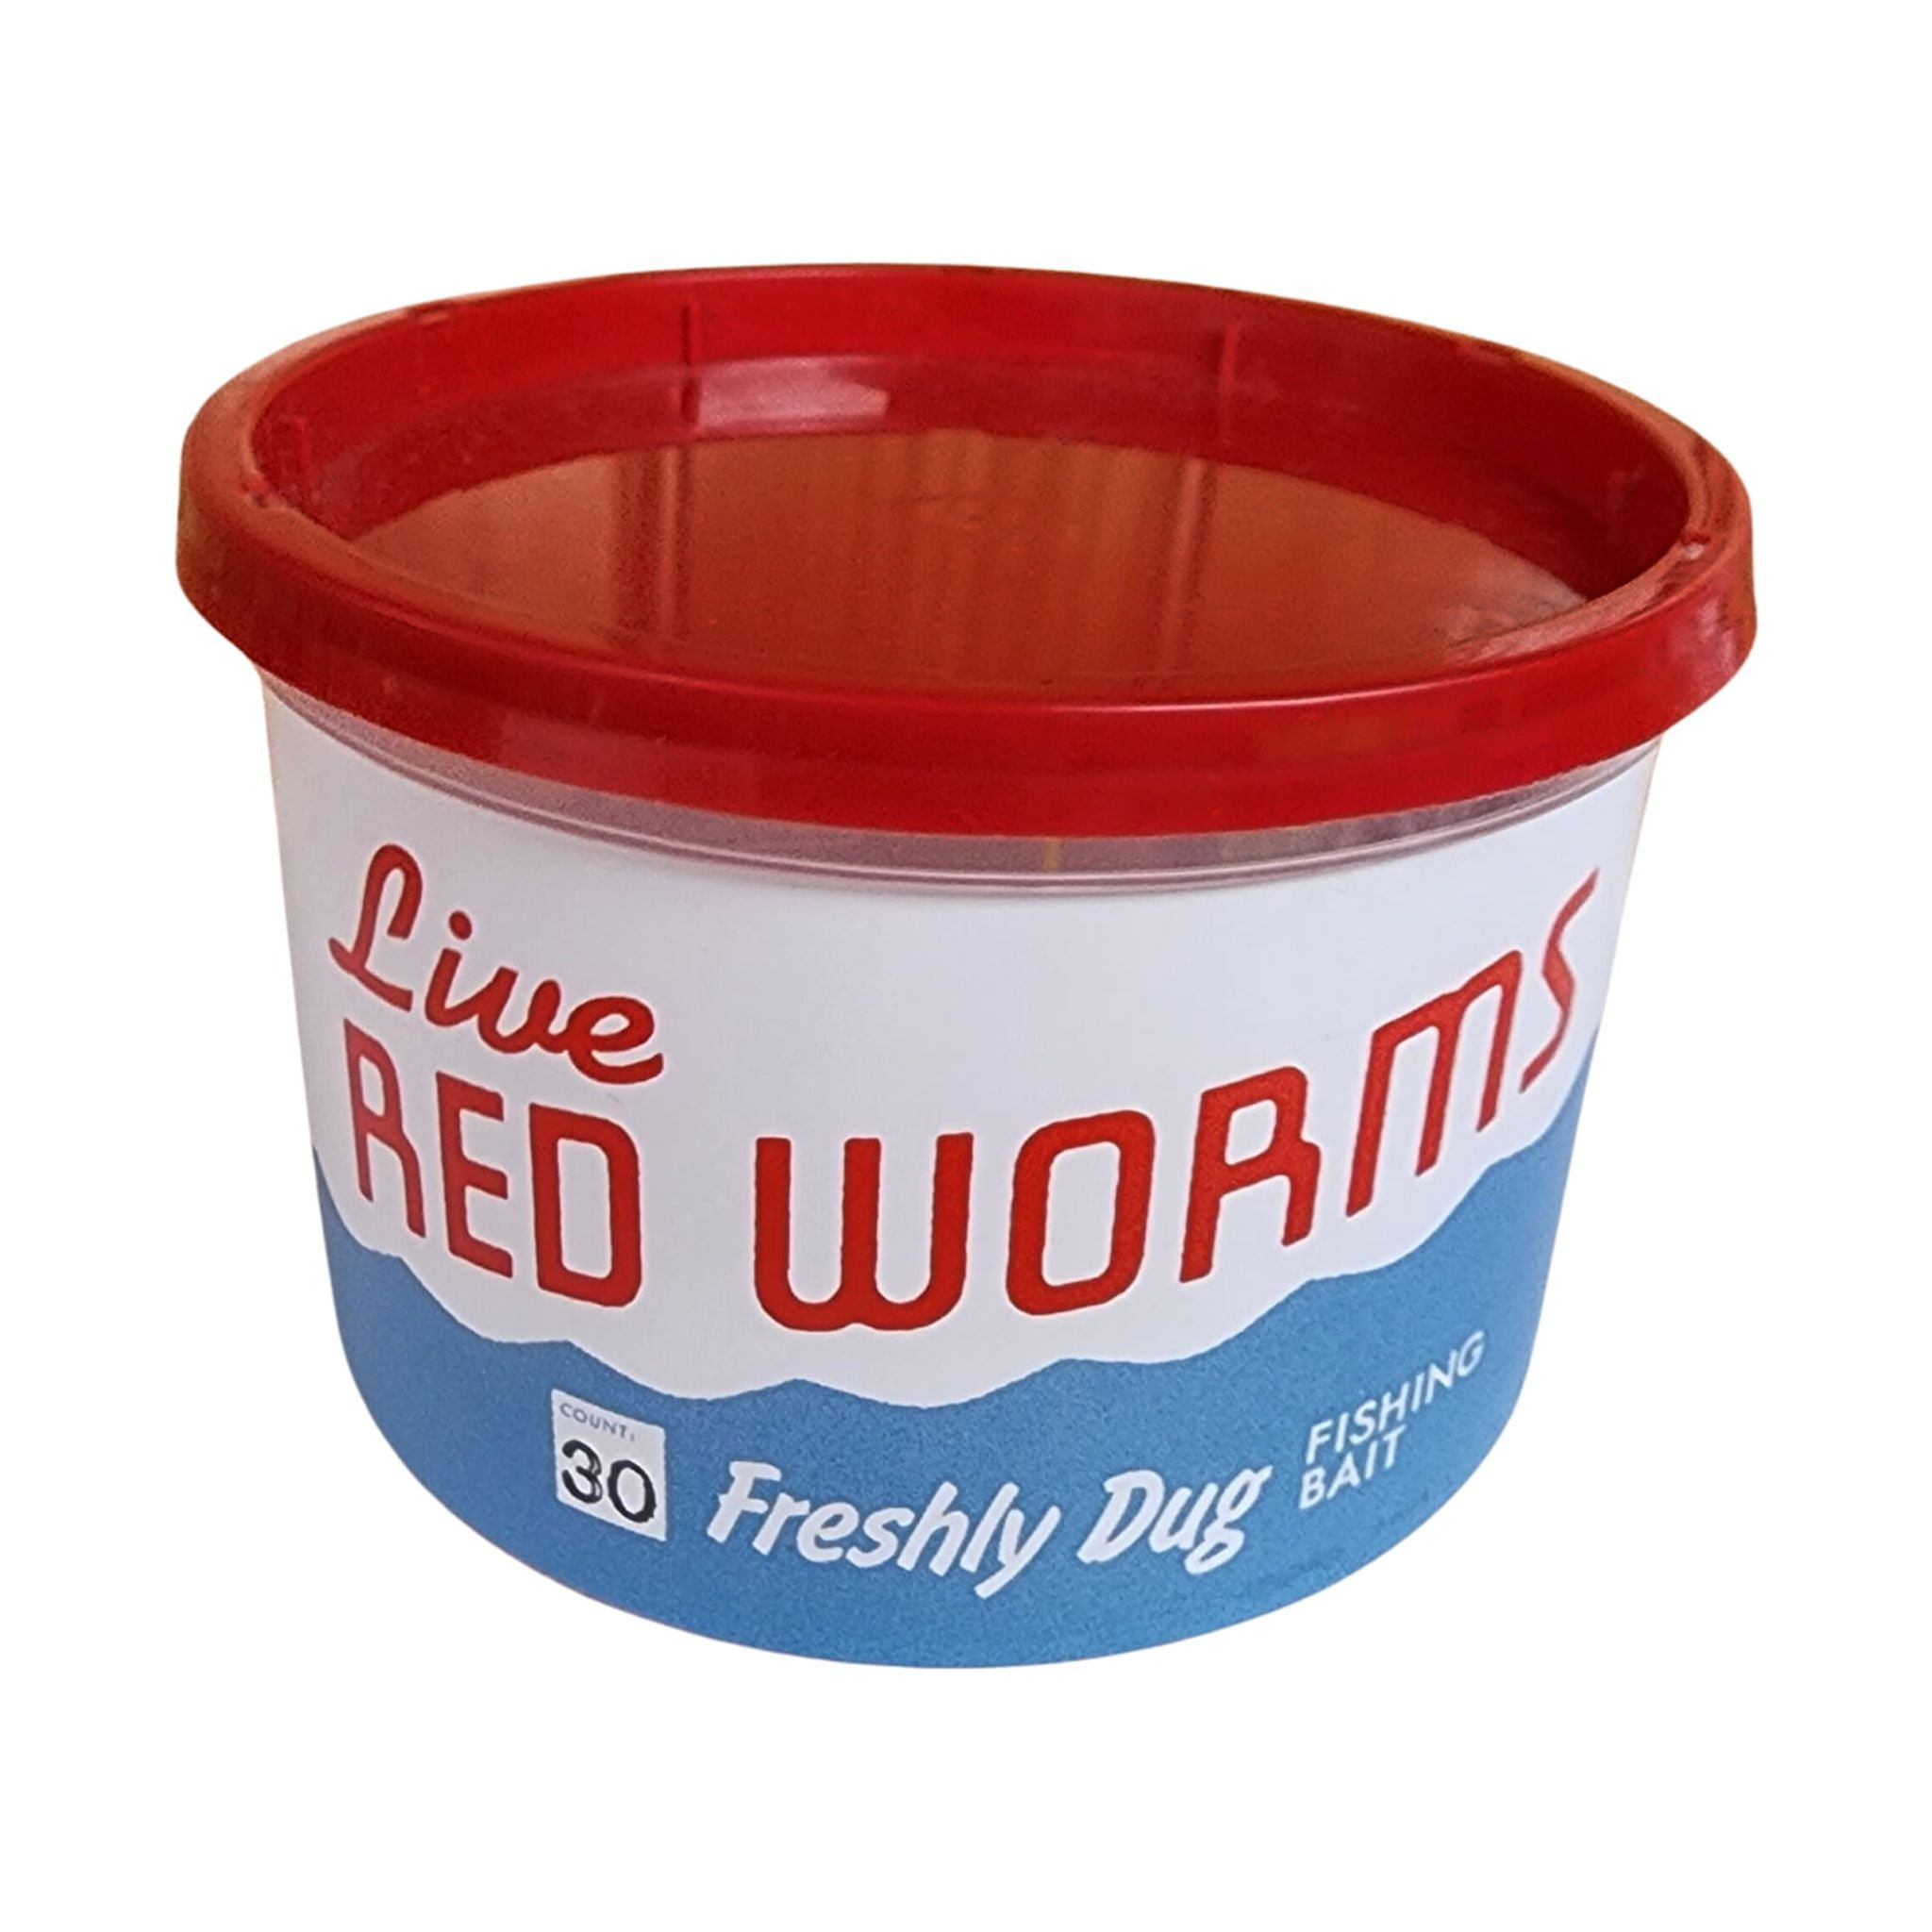 Live RED WORMS - 30-Count - 2 to 4 - the Perfect Size for Most